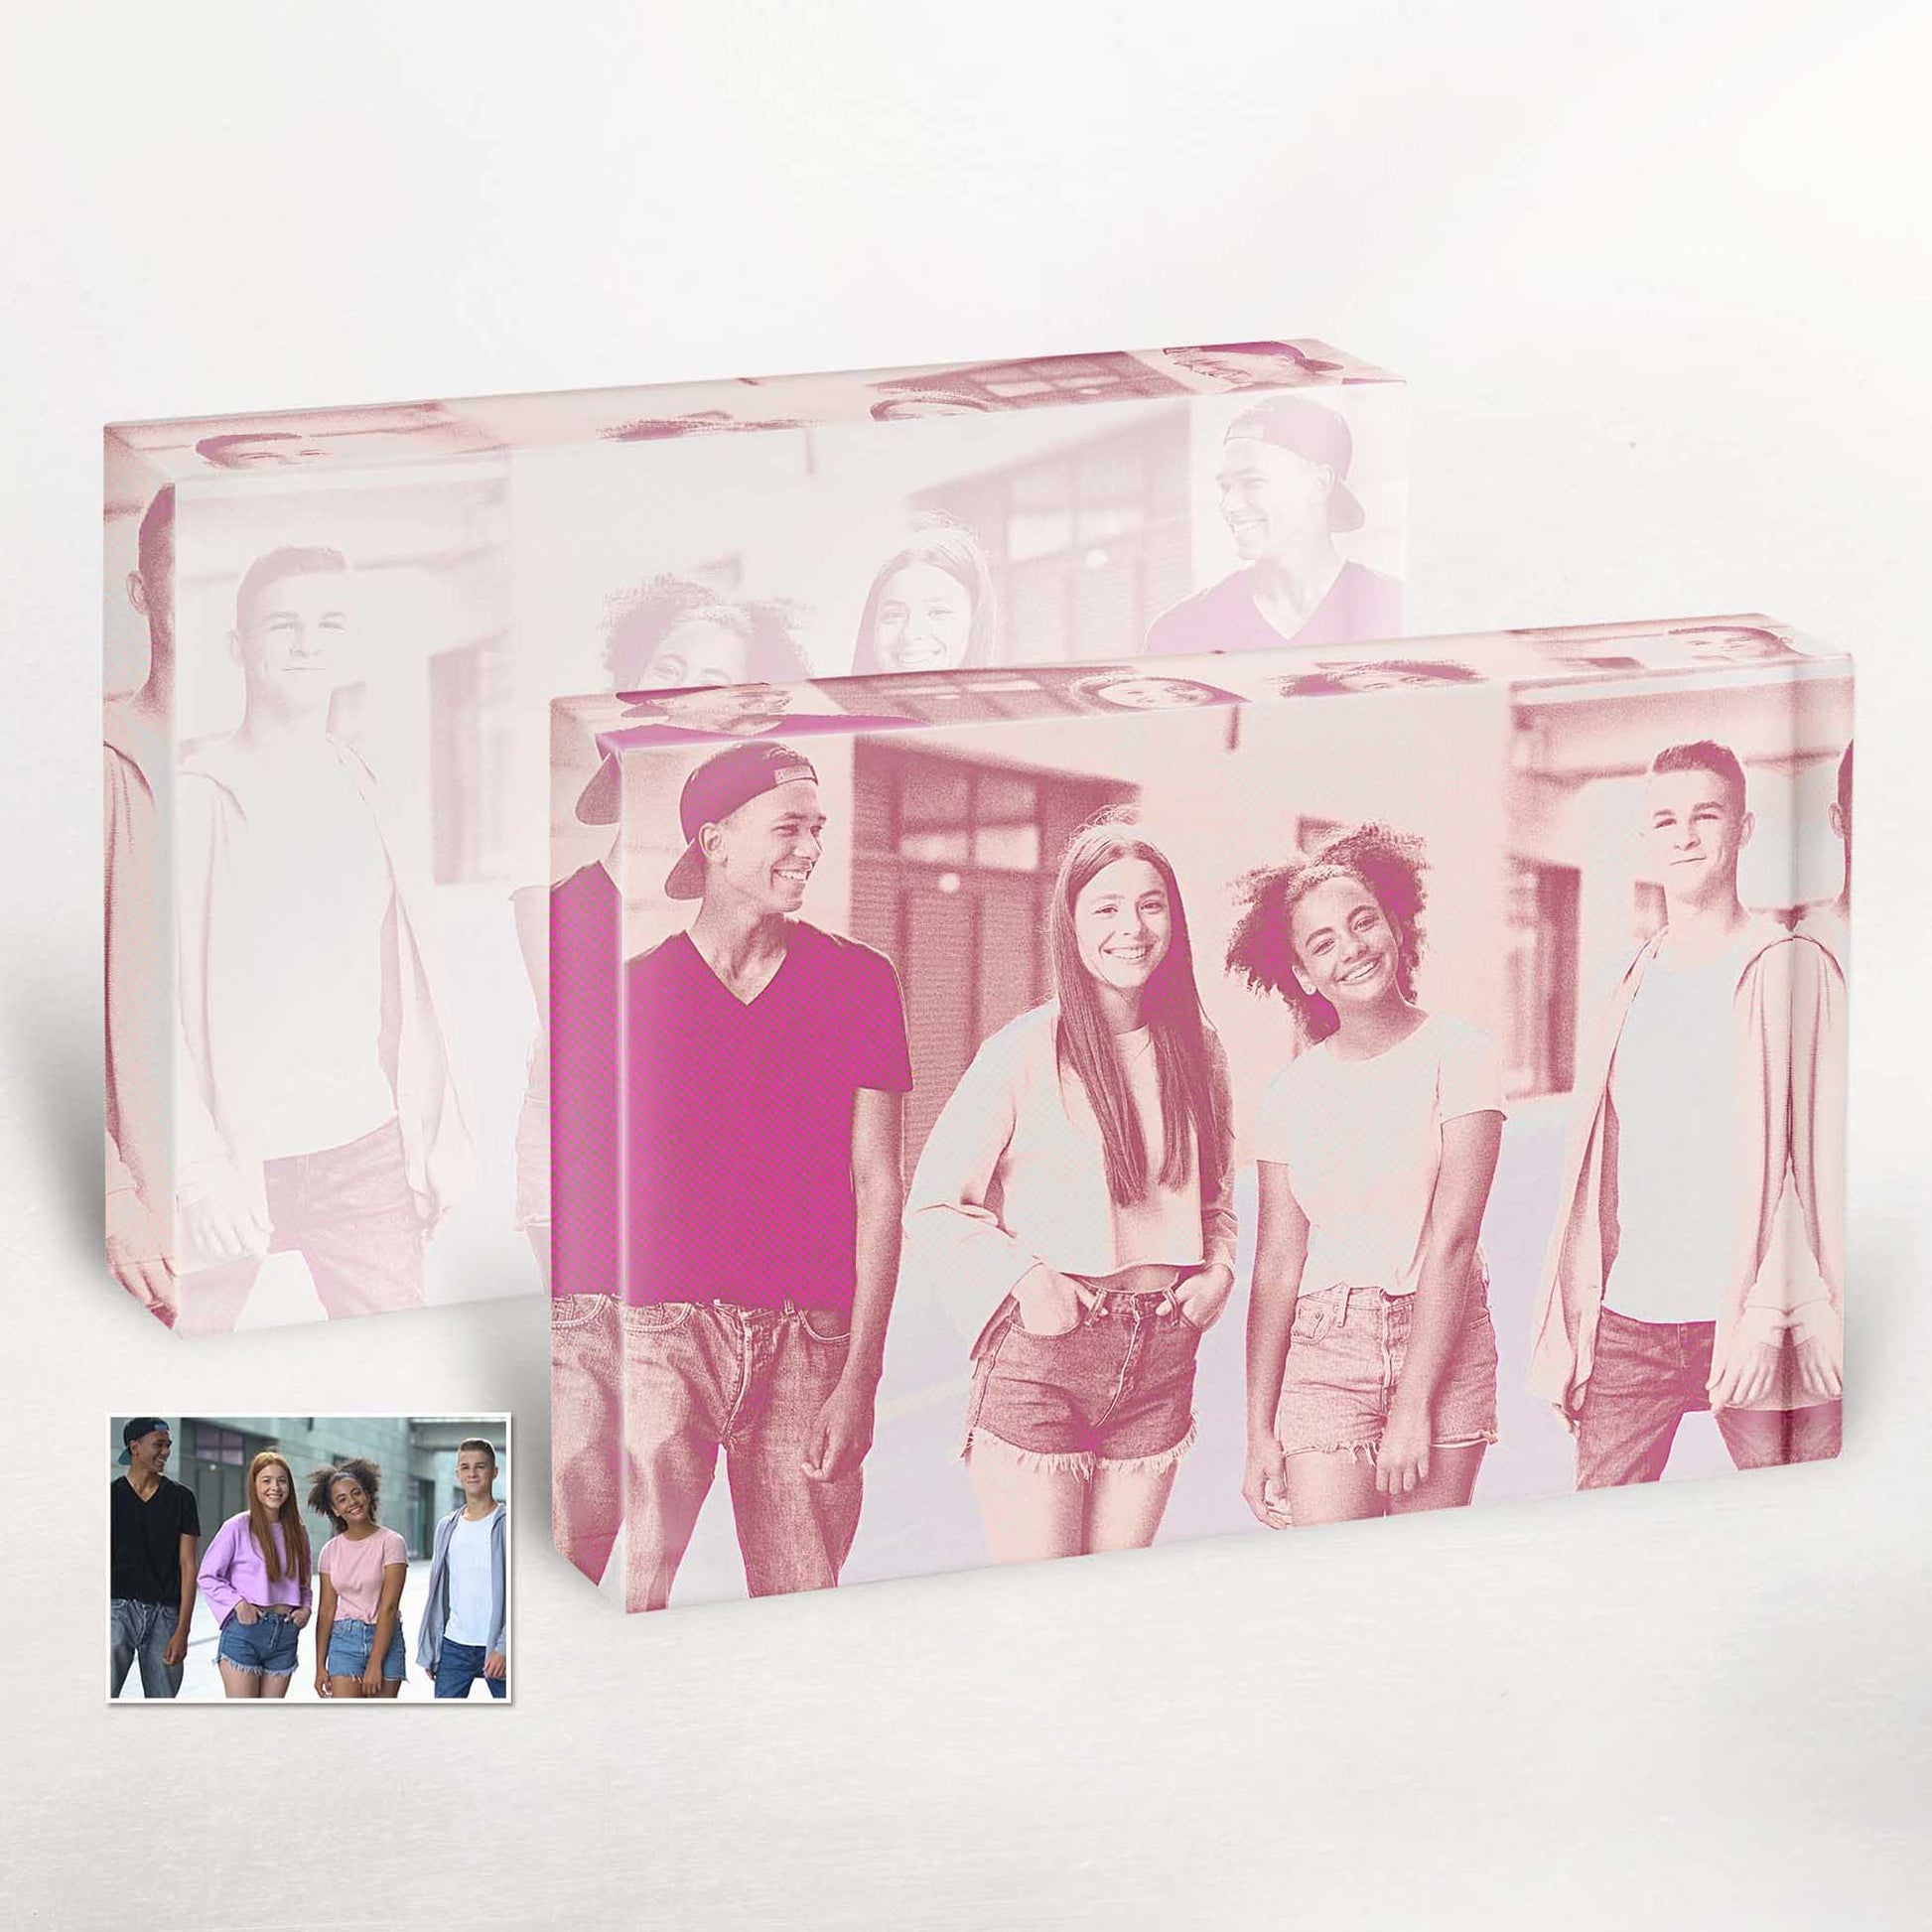 Add a touch of excitement and elegance to your home decor with the Personalised Pink Pop Halftone Acrylic Block Photo. Its vibrant colors and halftone design bring a sense of joy and charm to any room